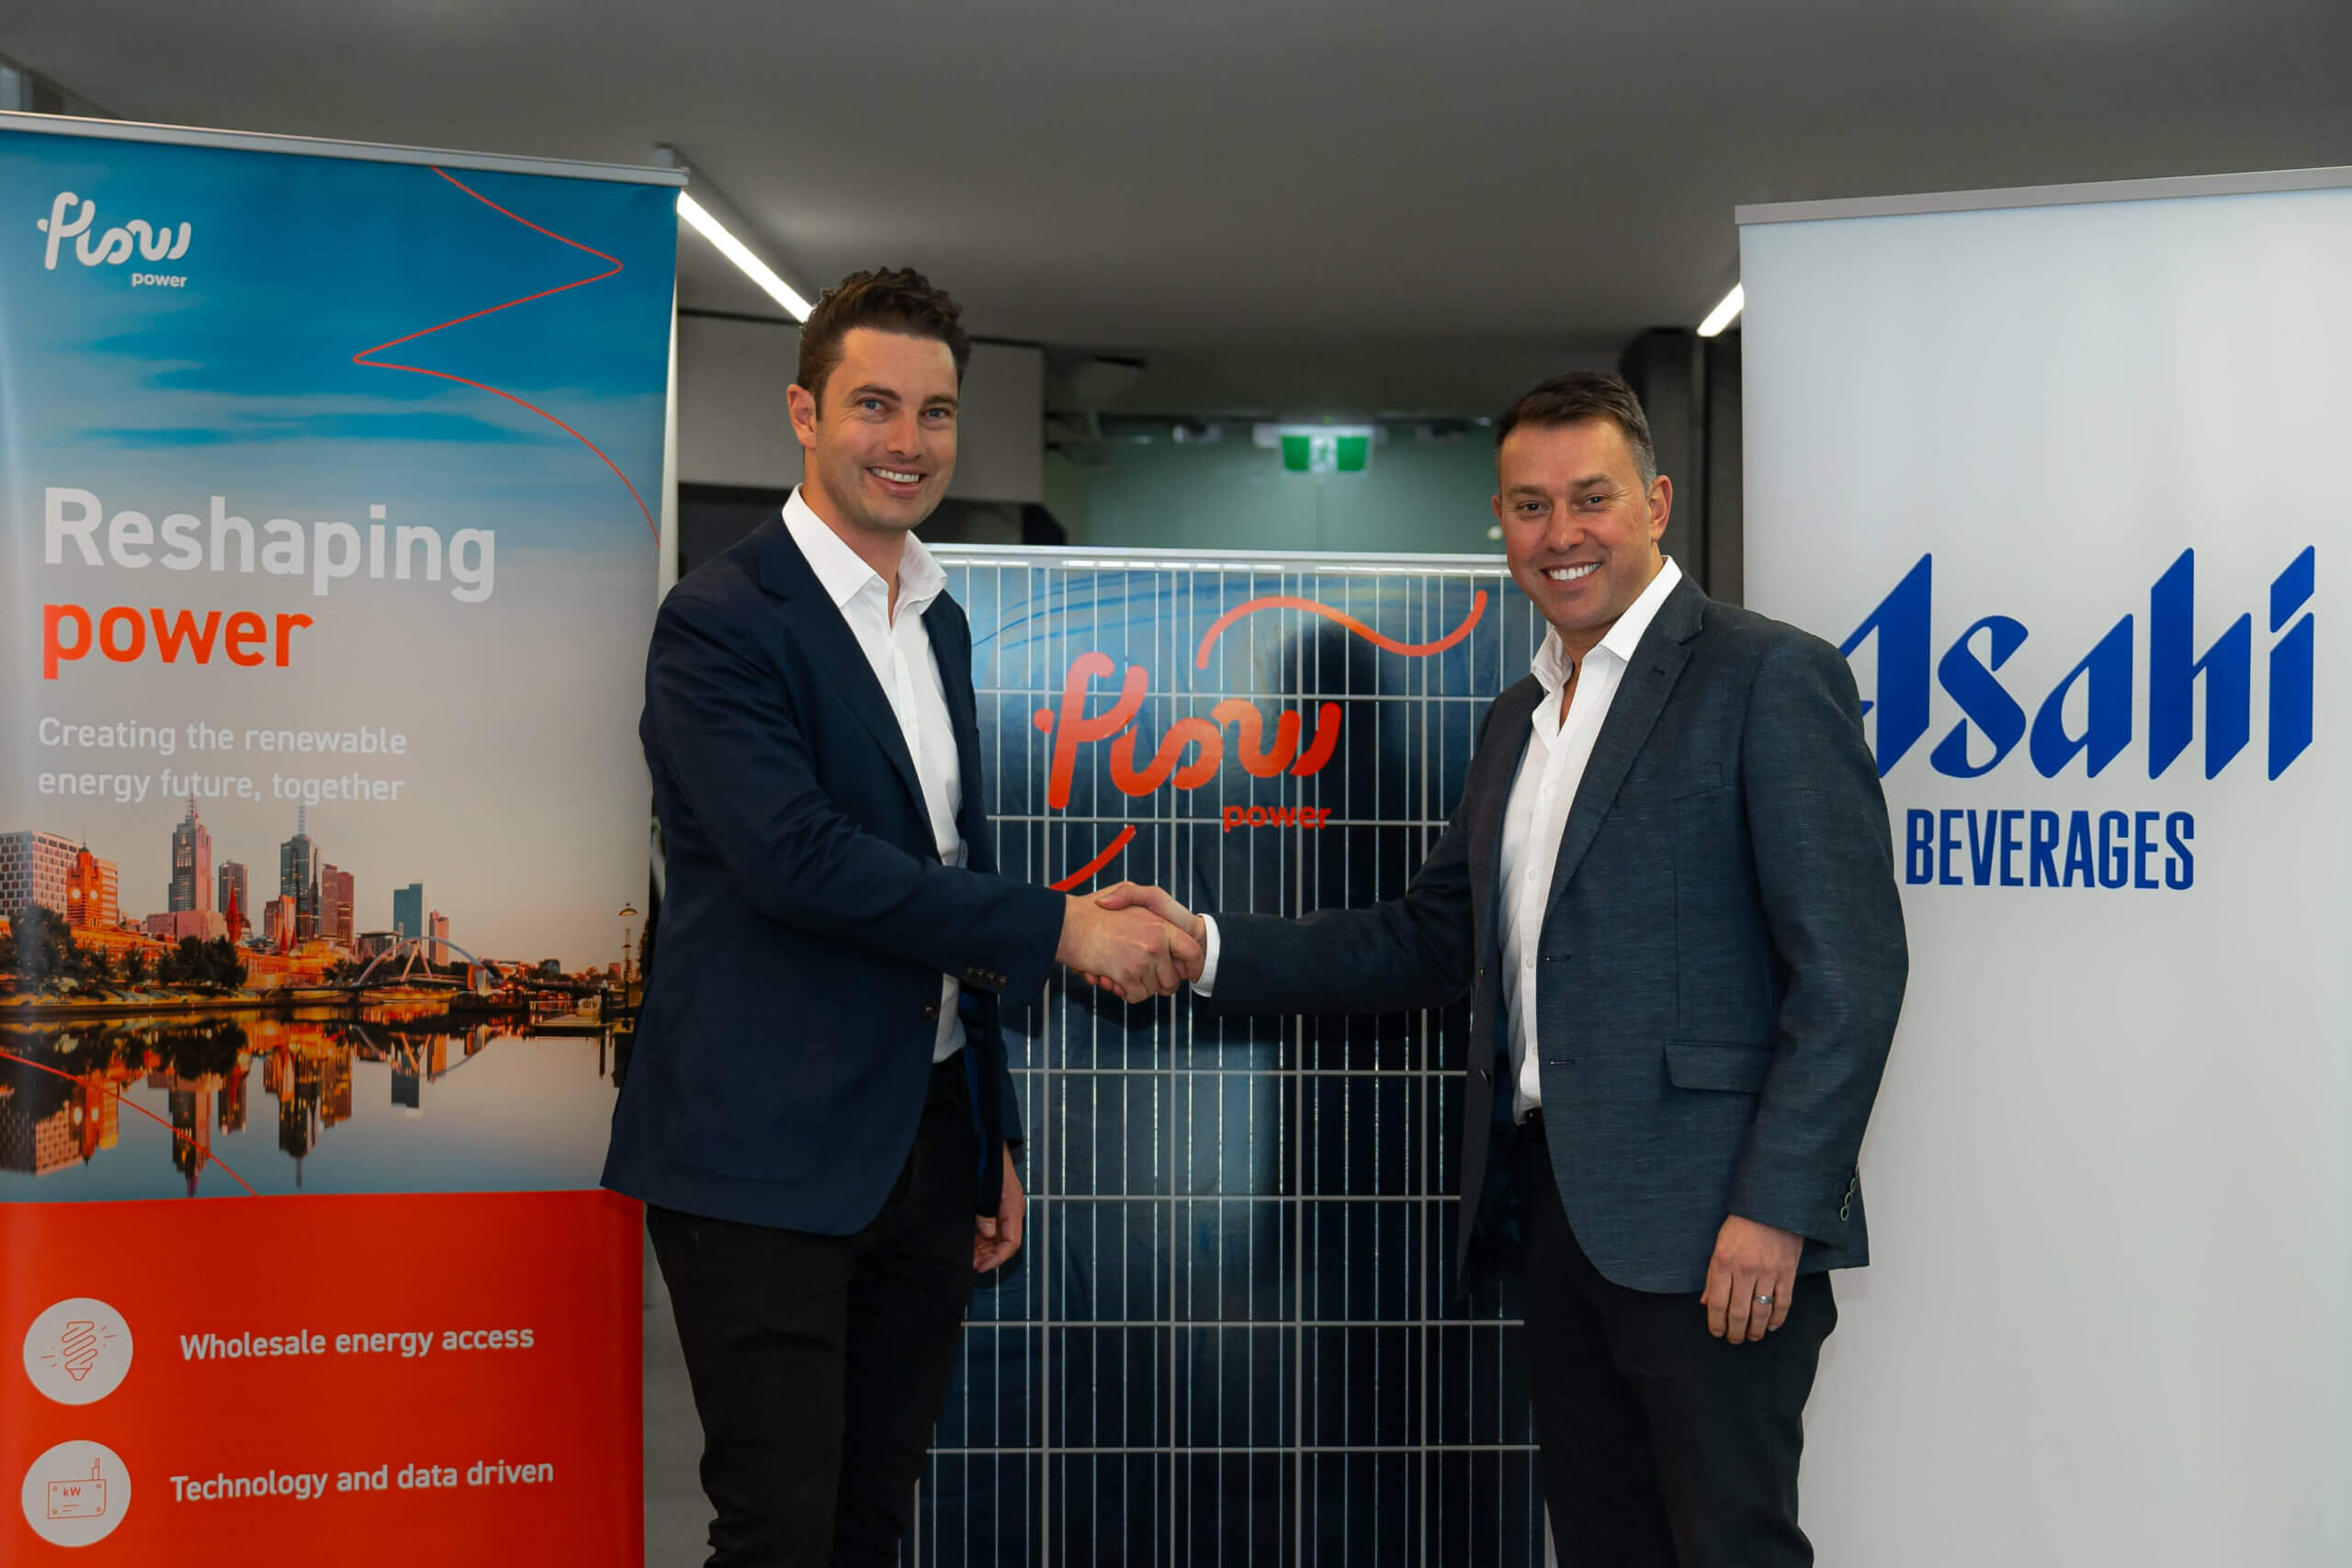 Asahi Beverages secures 40,000 MWh of renewable energy in 8-year deal with Flow Power